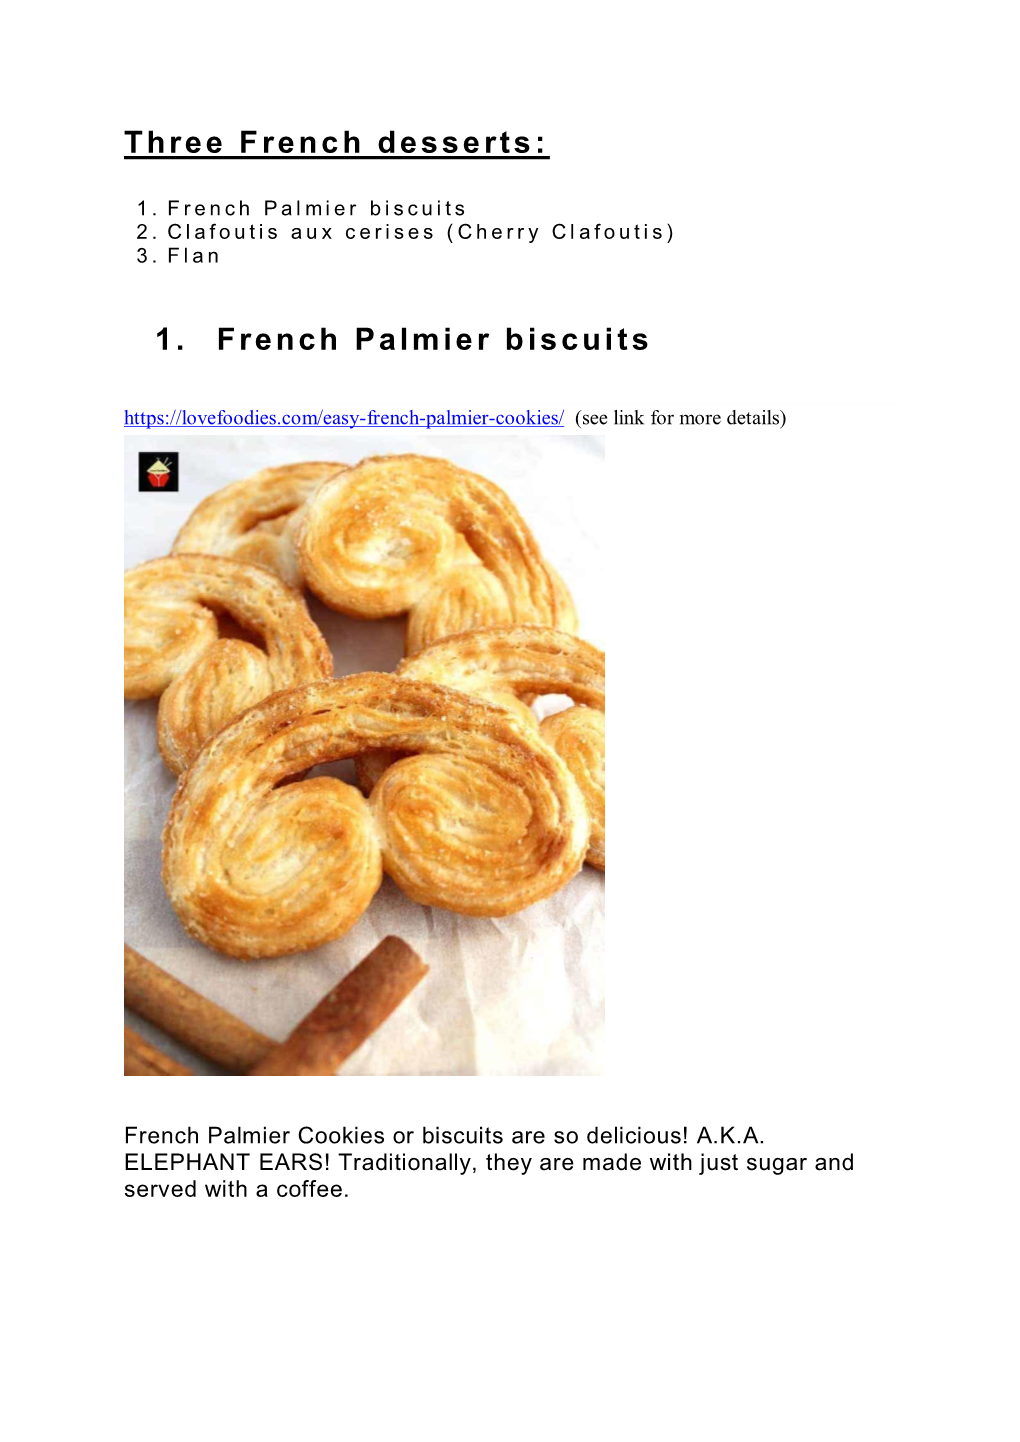 Three French Desserts: 1. French Palmier Biscuits